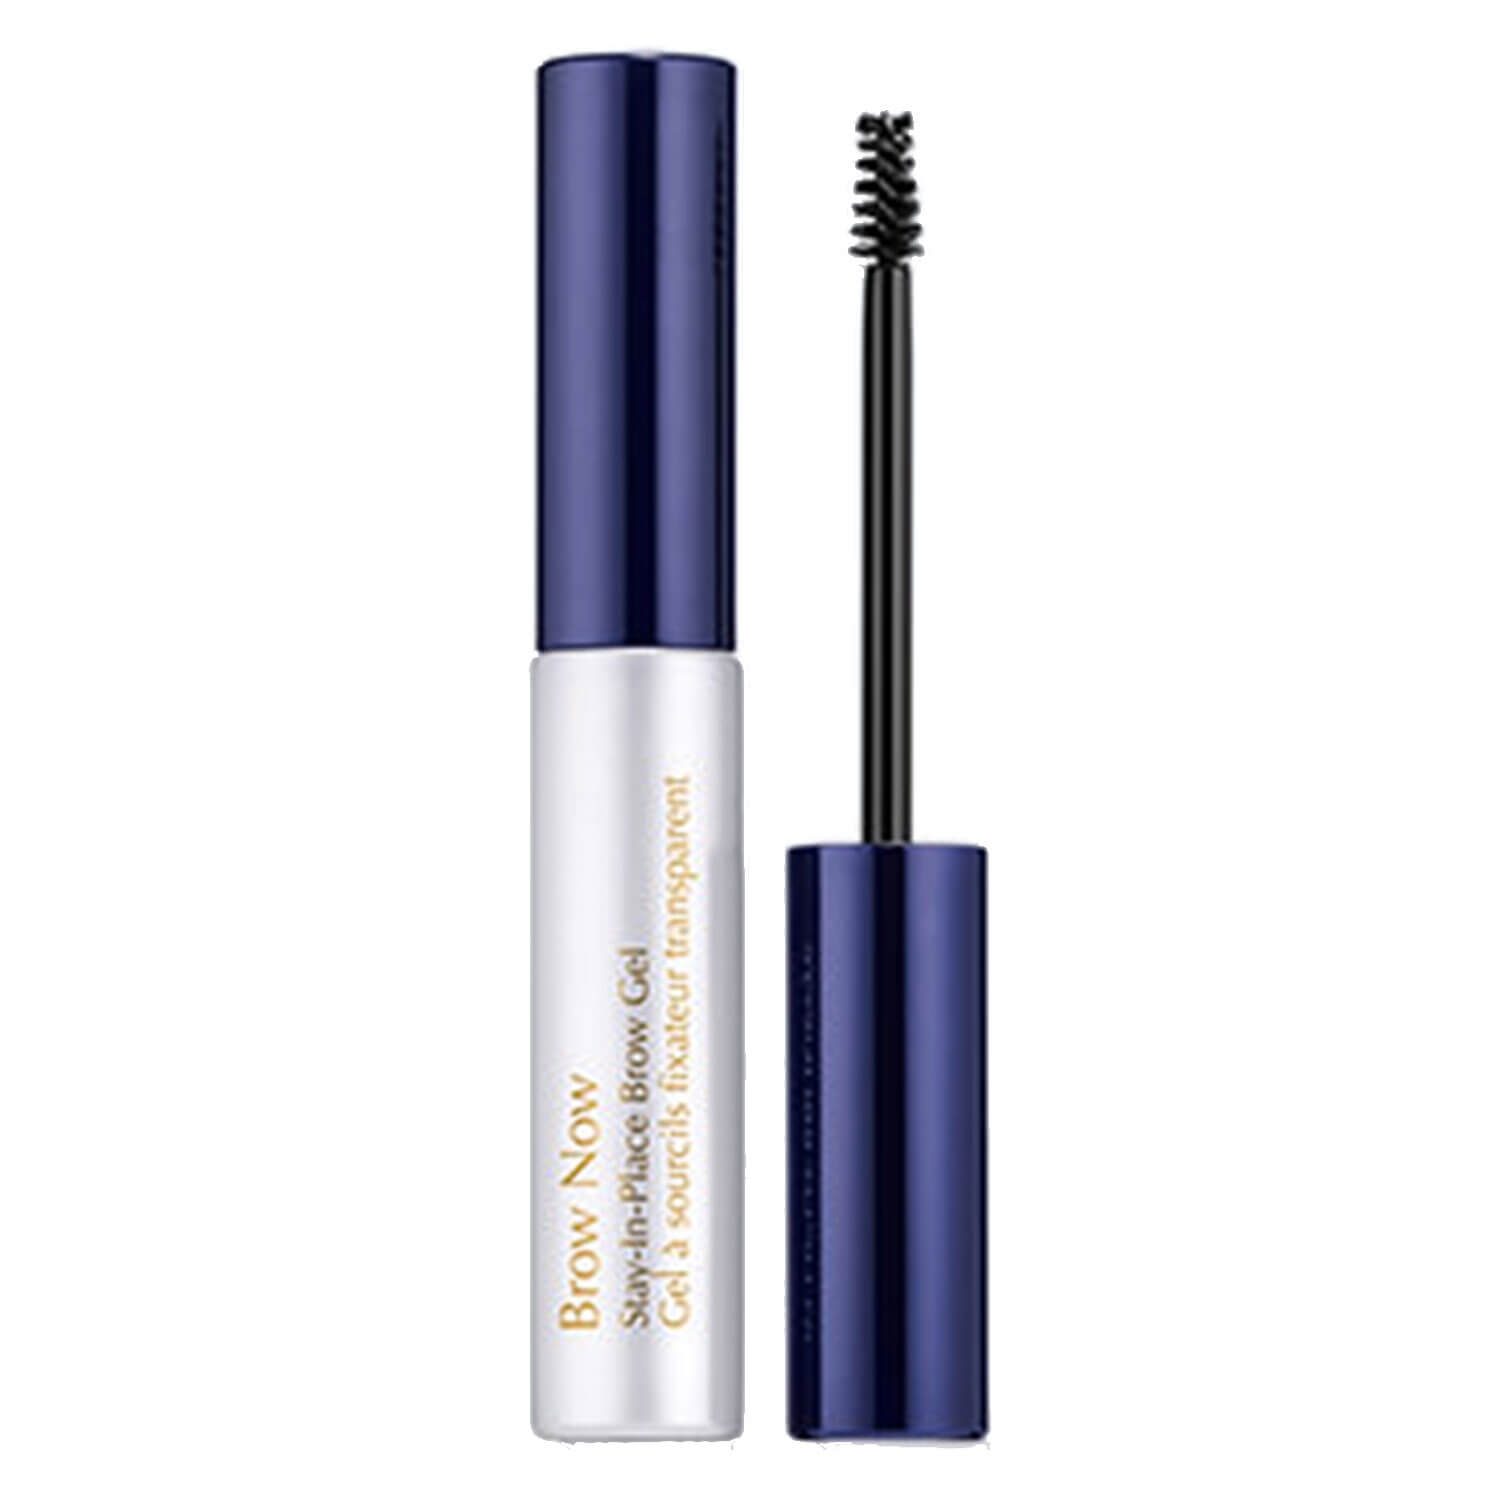 Product image from Brow Now - Stay-In-Place Brow Gel